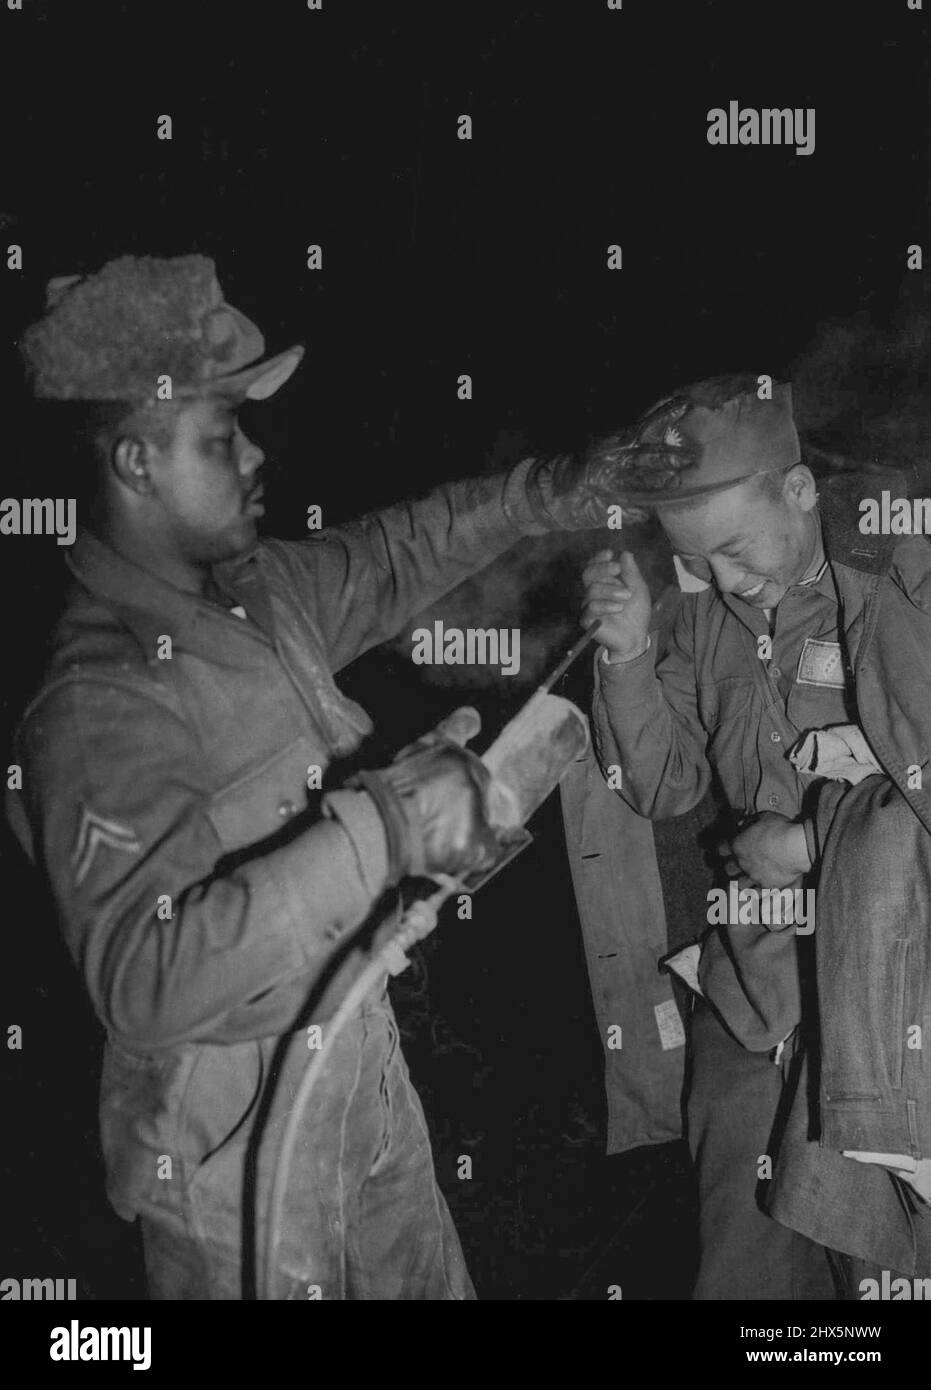 Korea Pows en Route to Chiang Kai-Shek -- A freed Chinese Laughs as he gets a routine de-lousing spray at Ascom City before moving on to inchon and Formosa. Following the release of Nearly 22,000 Chinese and North Korean prisoners of war by their Indian custodians, Thousands of Chinese have been streaming to inchon to Board tank-landing shops which will take them to Formosa. American warships and planes will Escort them to the Nationalist China island ruled by Chiang Kai-Shek. The trip will take three days. January 26, 1954. (Photo by Associated Press Photo). Stock Photo